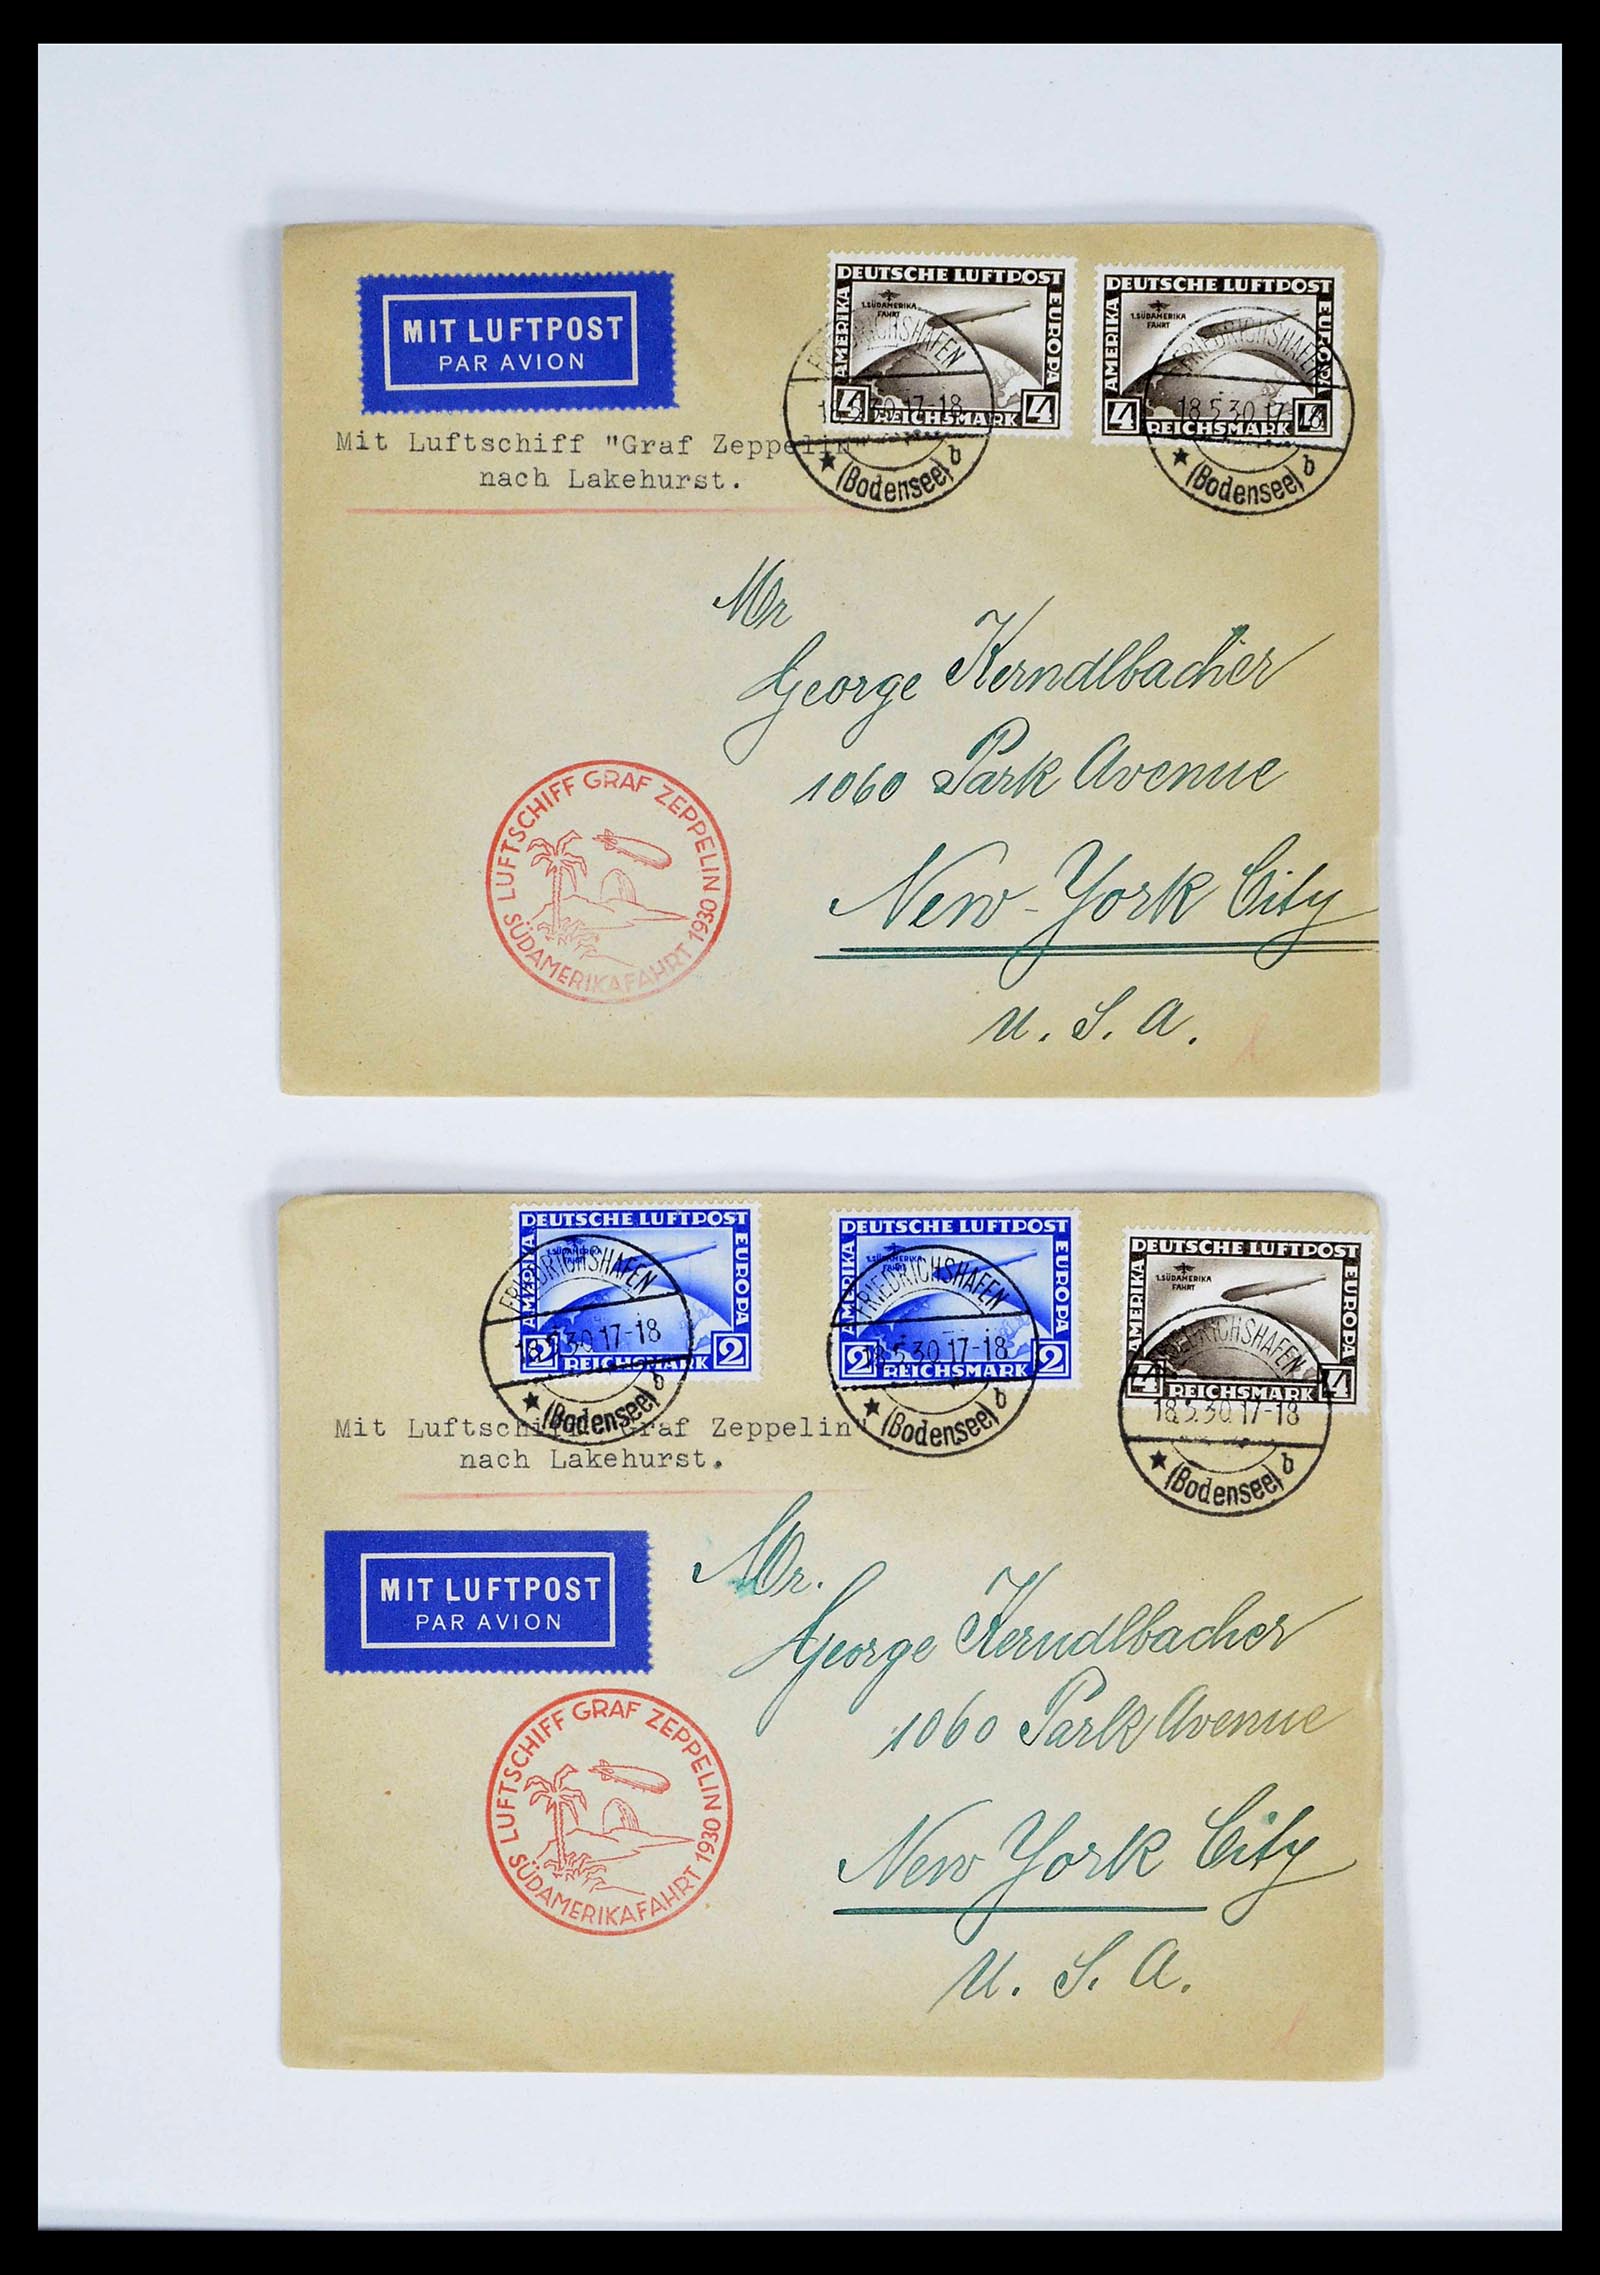 39032 0006 - Stamp collection 39032 Zeppelin covers 1928-1933.